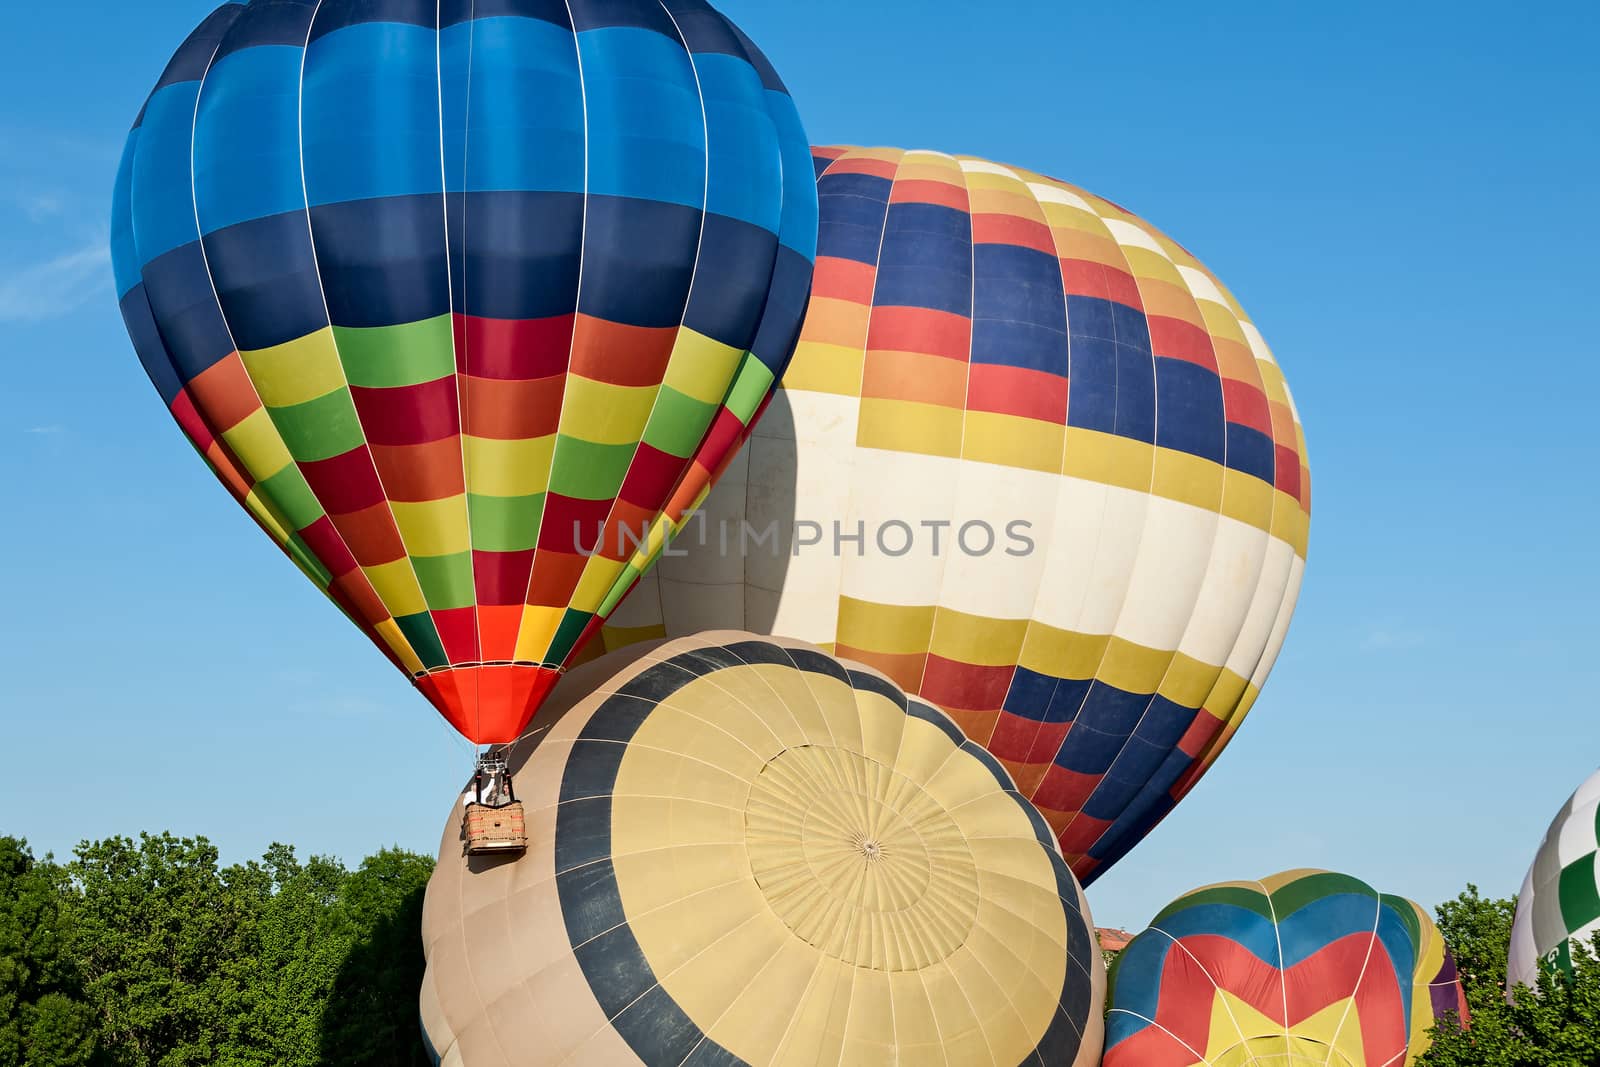 Colorful hot-air balloons ready to get up in flight against a blue sky